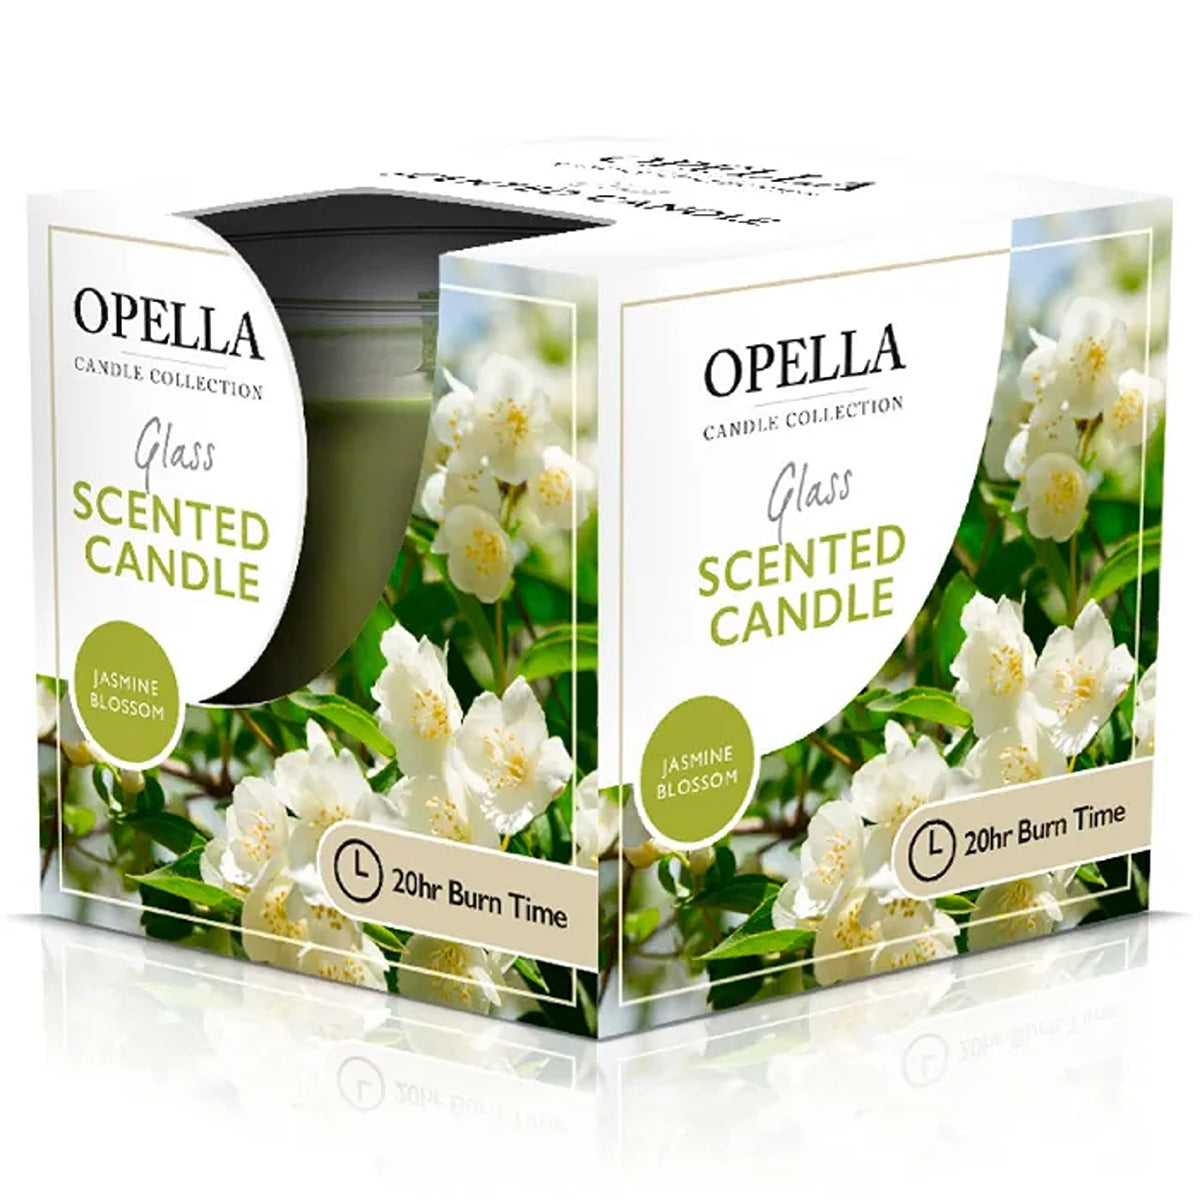 Opella - Scented Candle In Glass Jar Jasmine Blossom - Continental Food Store